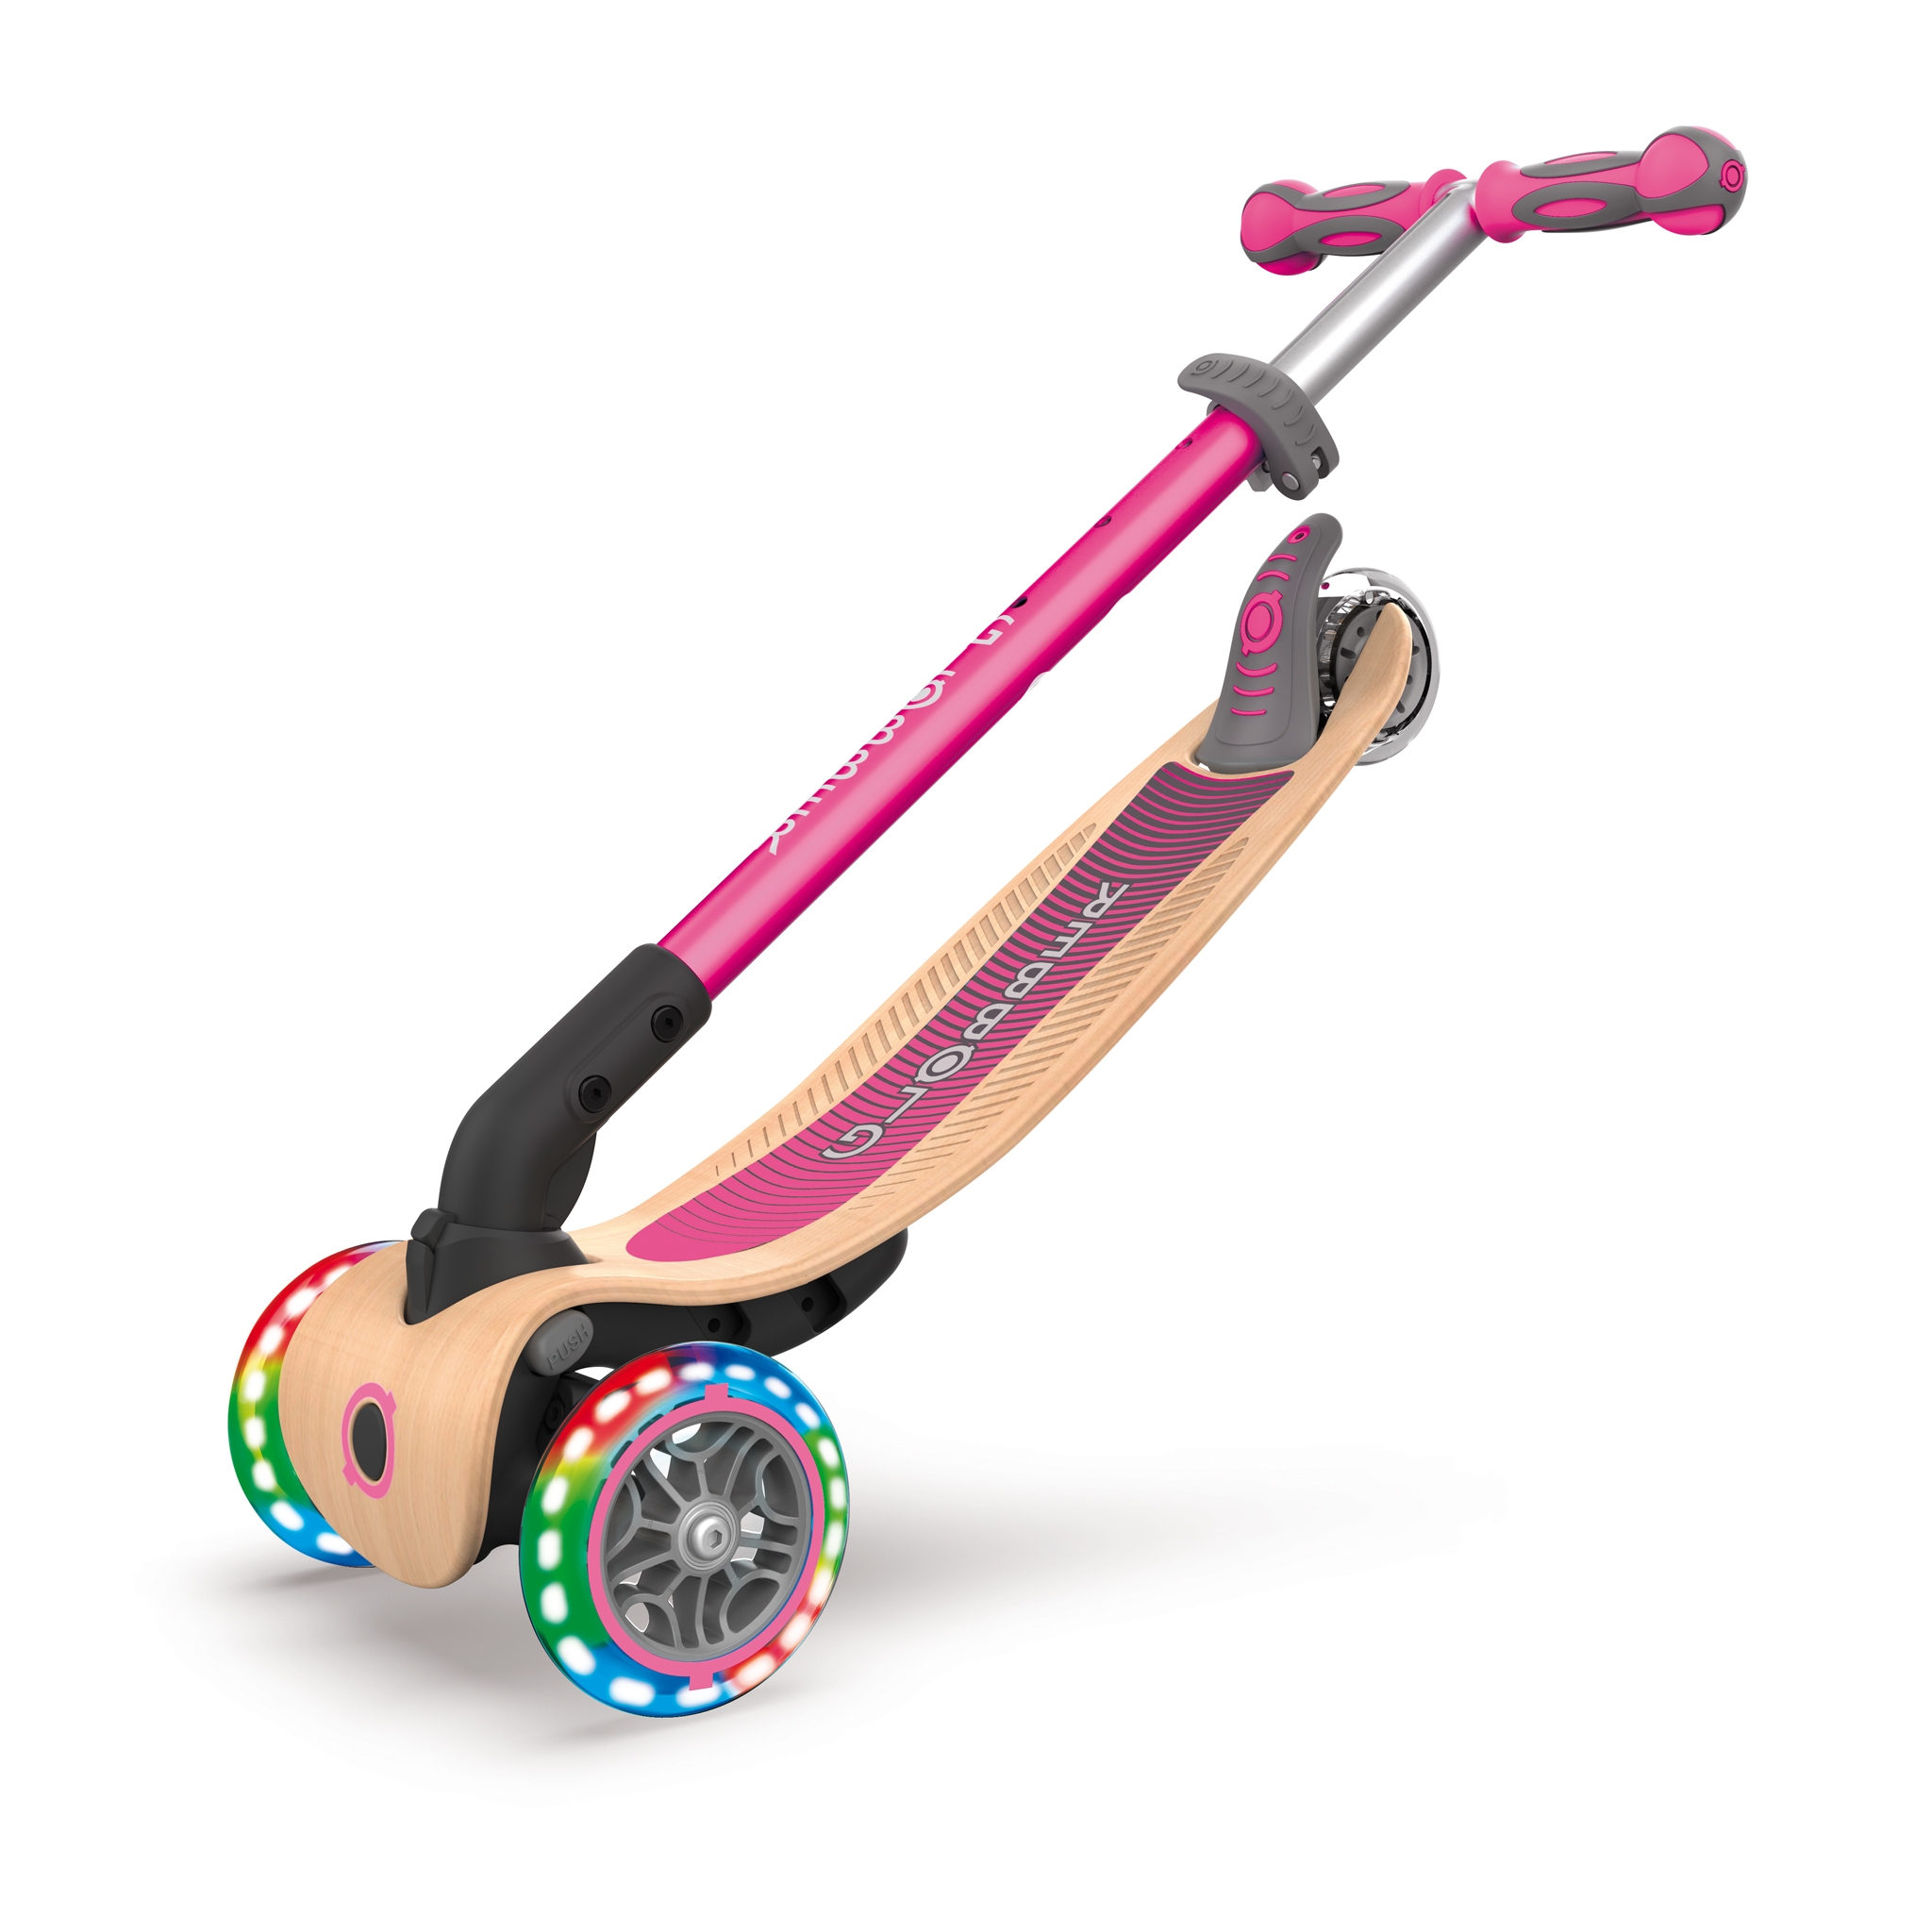 PRIMO-FOLDABLE-WOOD-LIGHTS-3-wheel-foldable-light-up-scooter-with-7-ply-wooden-scooter-deck-trolley-mode-compatible_deep-pink 5